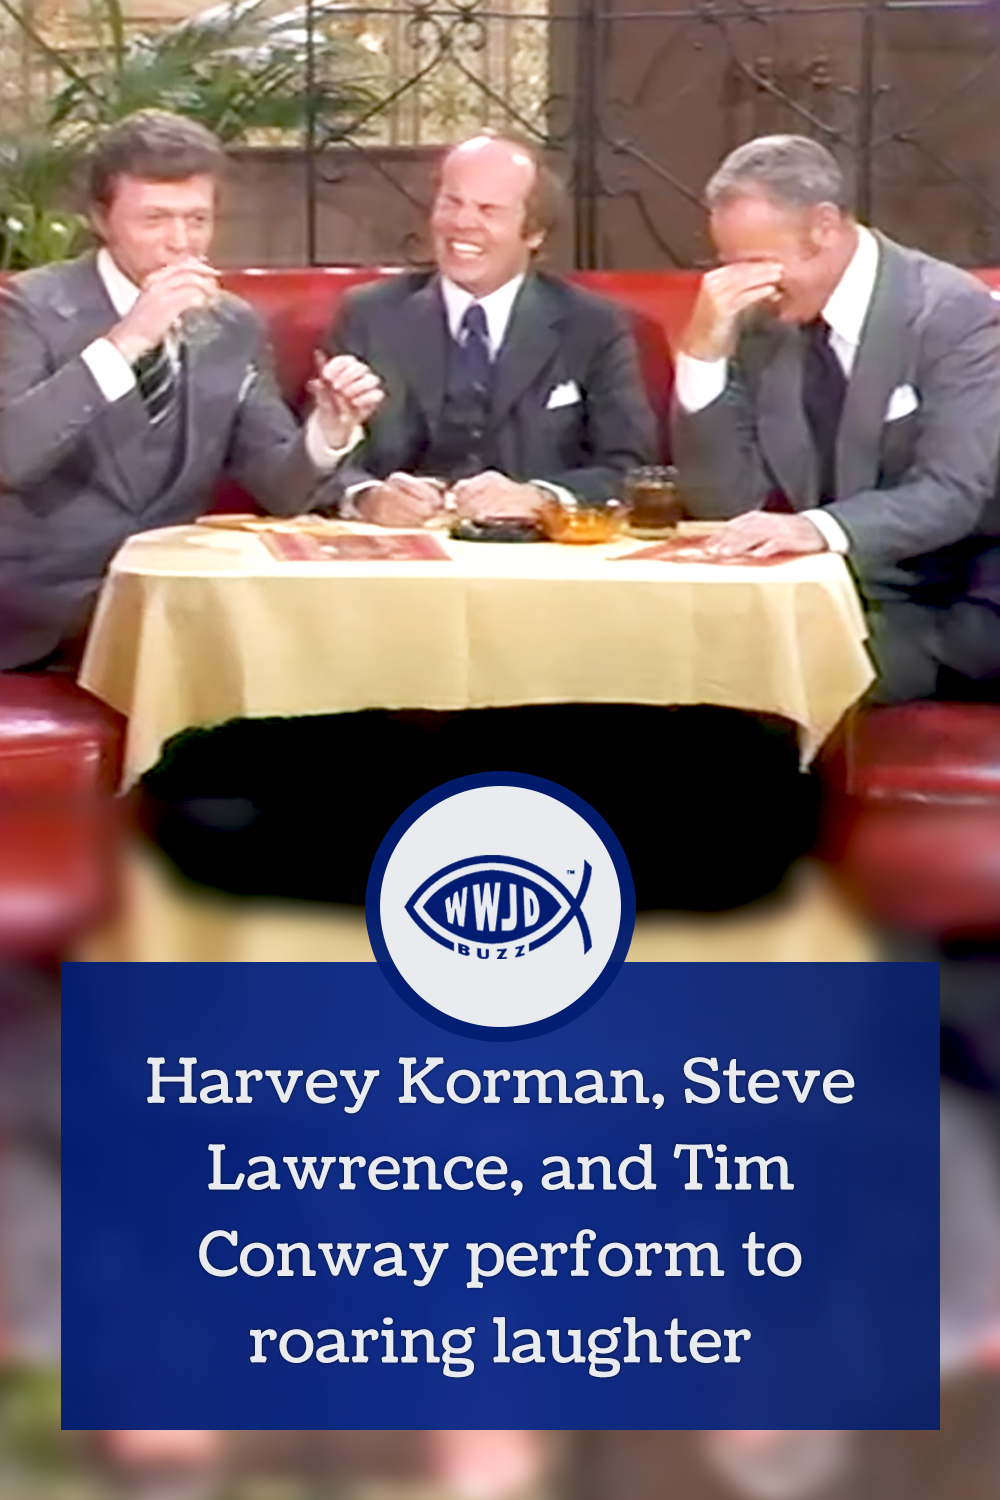 Harvey Korman, Steve Lawrence, and Tim Conway perform to roaring laughter